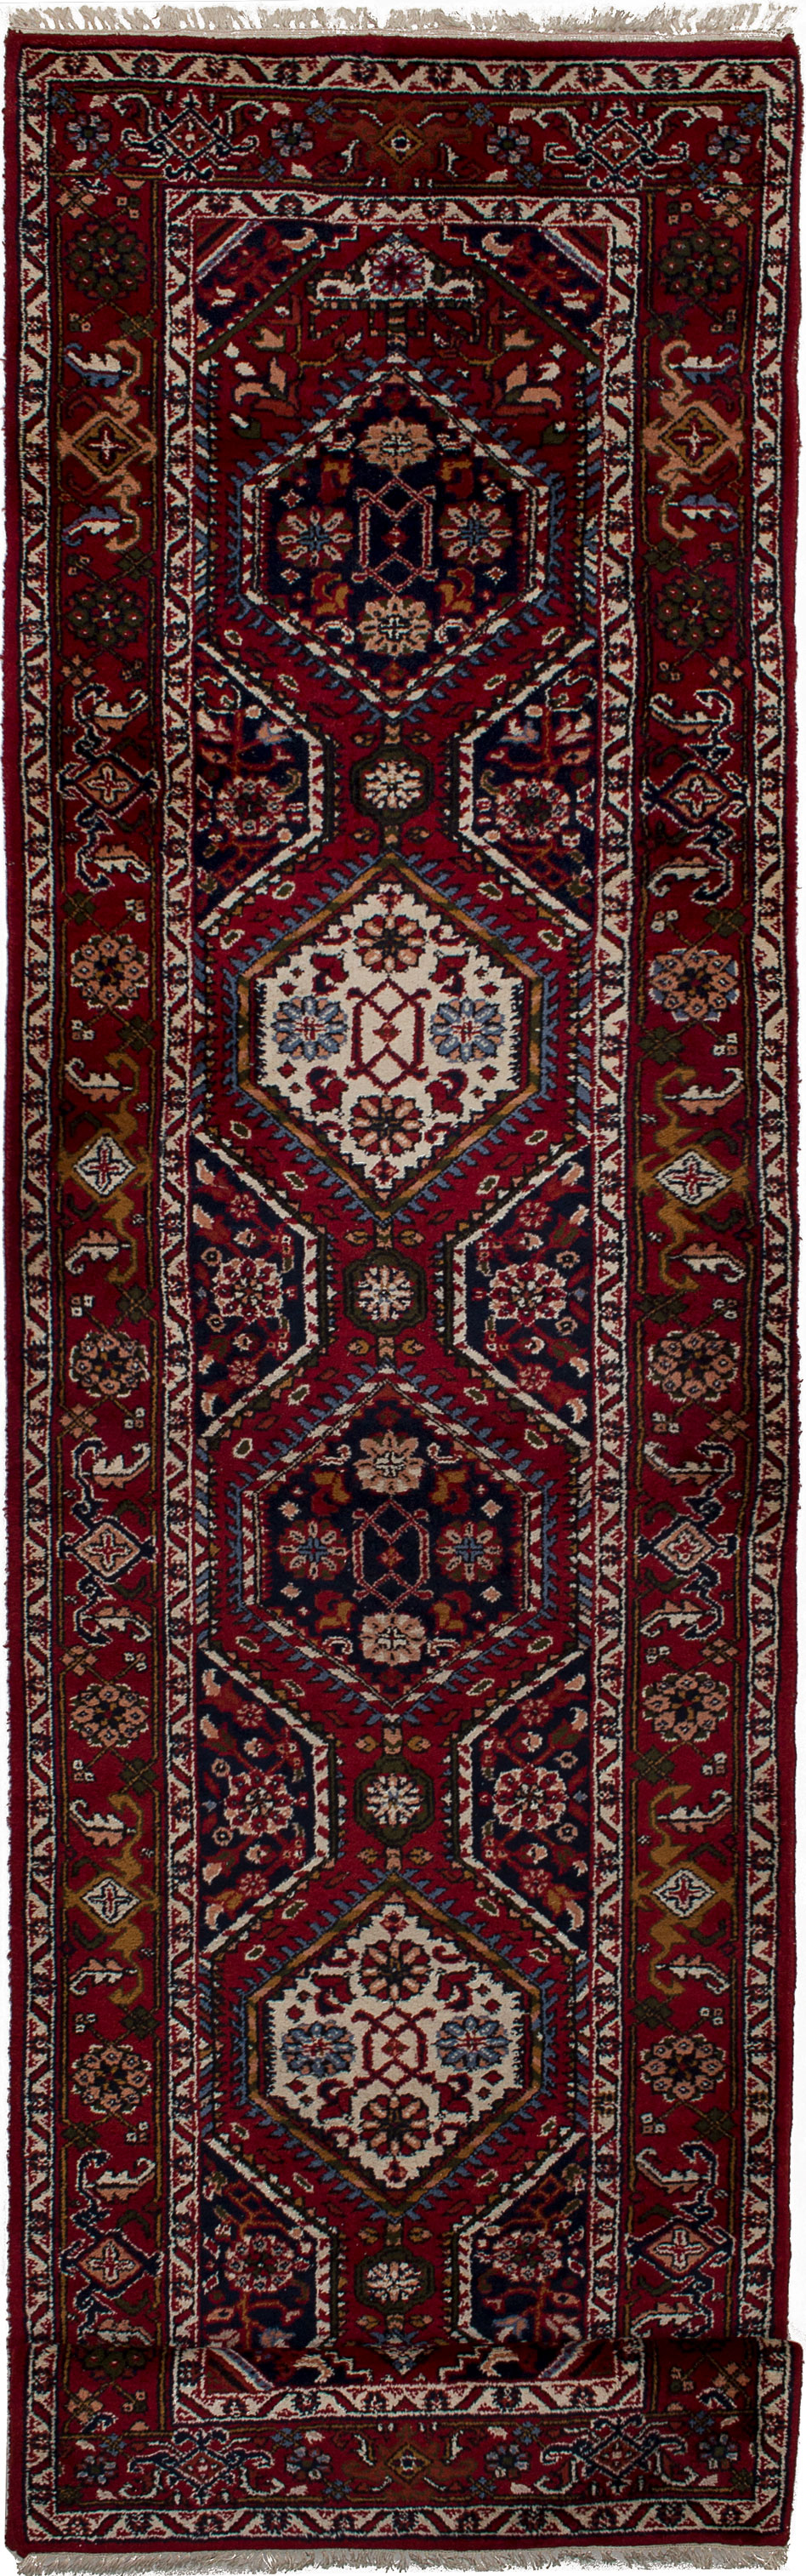 Hand-knotted Royal Sarough Red Wool Rug 3'3" x 11'5" Size: 3'3" x 11'5"  